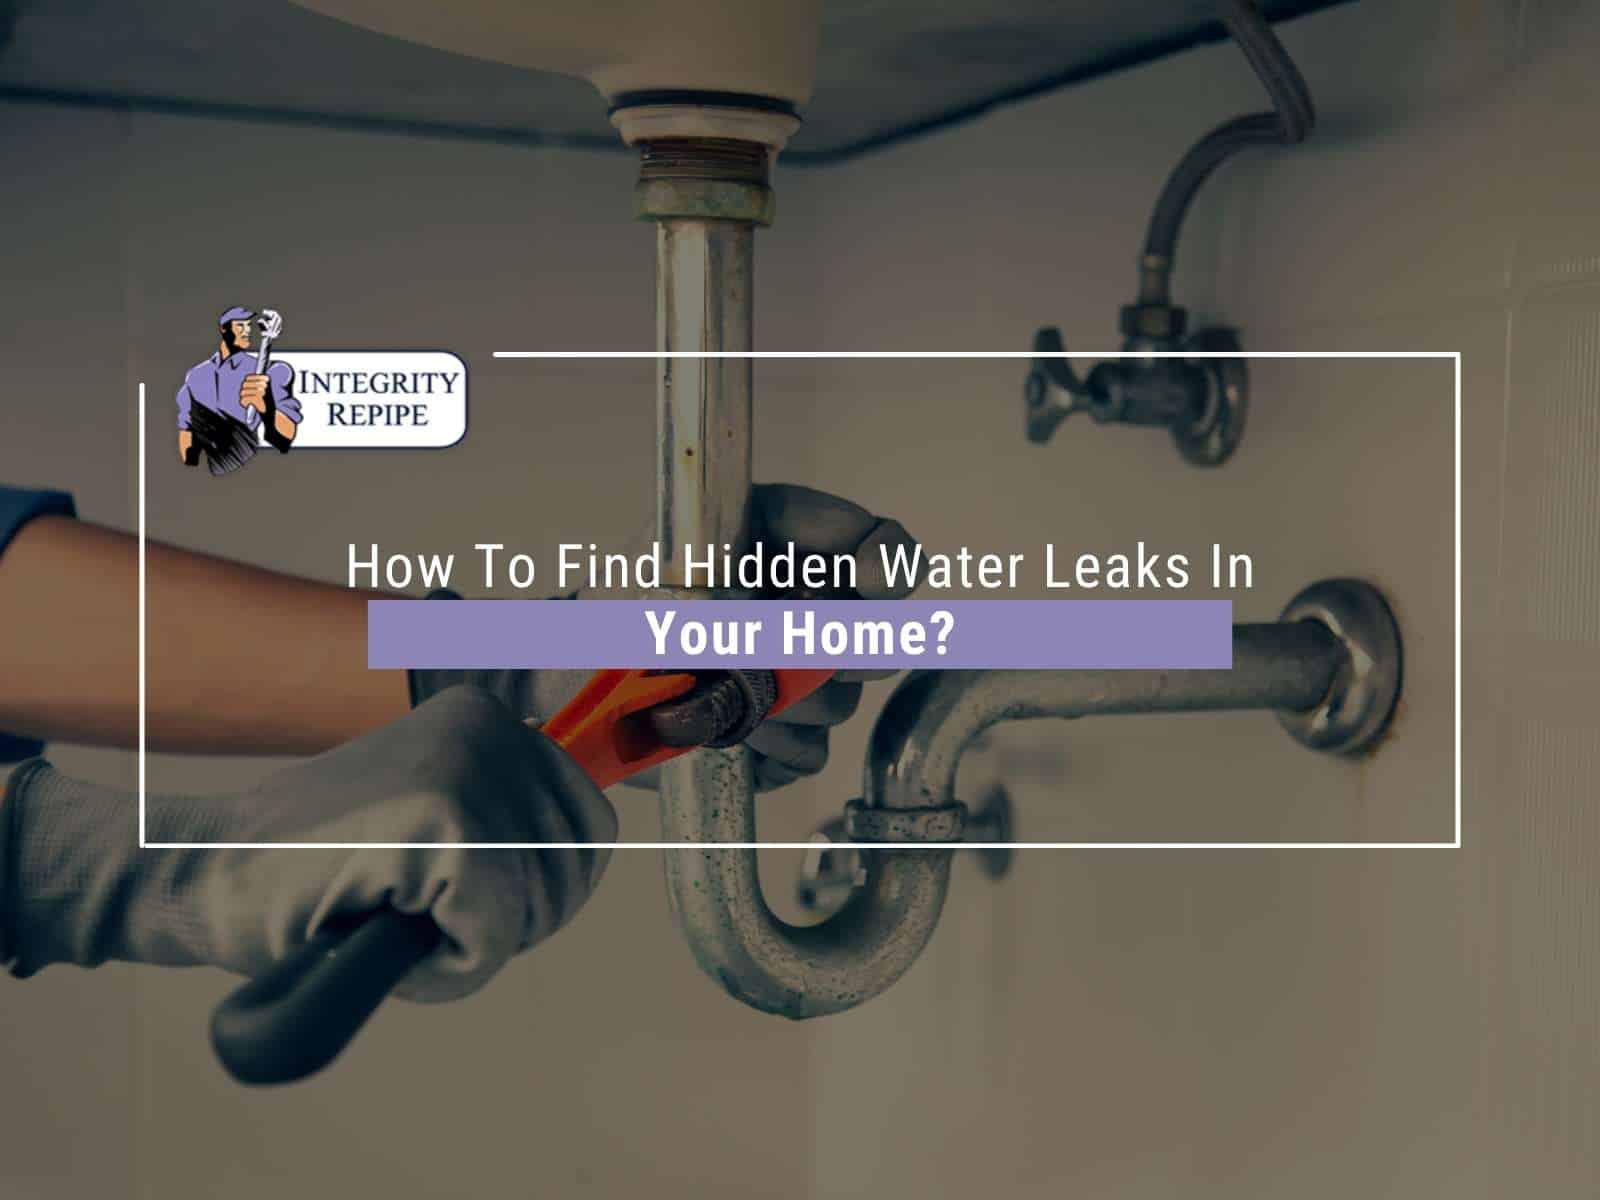 How To Find Hidden Water Leaks In Your Home